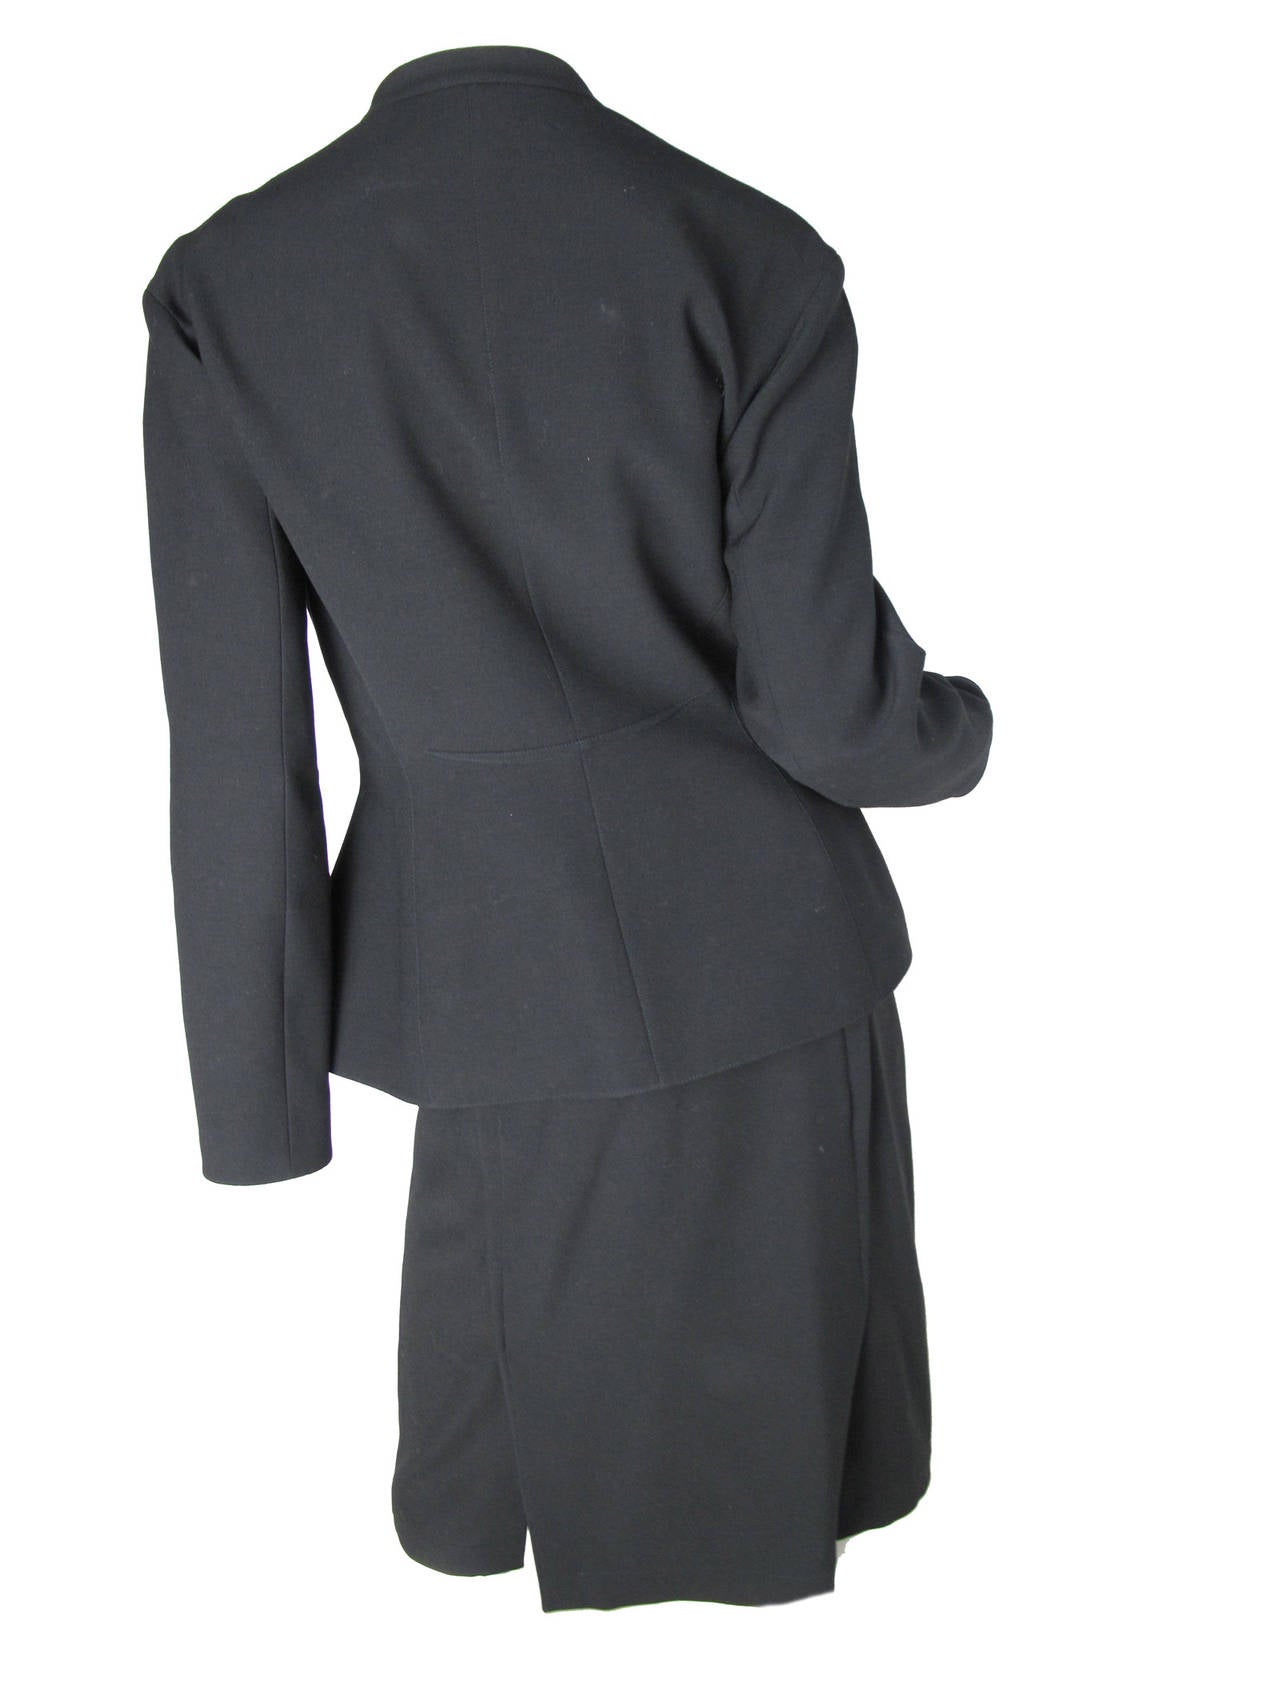 Thierry Mugler black wool suit.  Snaps to close jacket. Fitted waist. Two front pockets.  
Blazer: 37